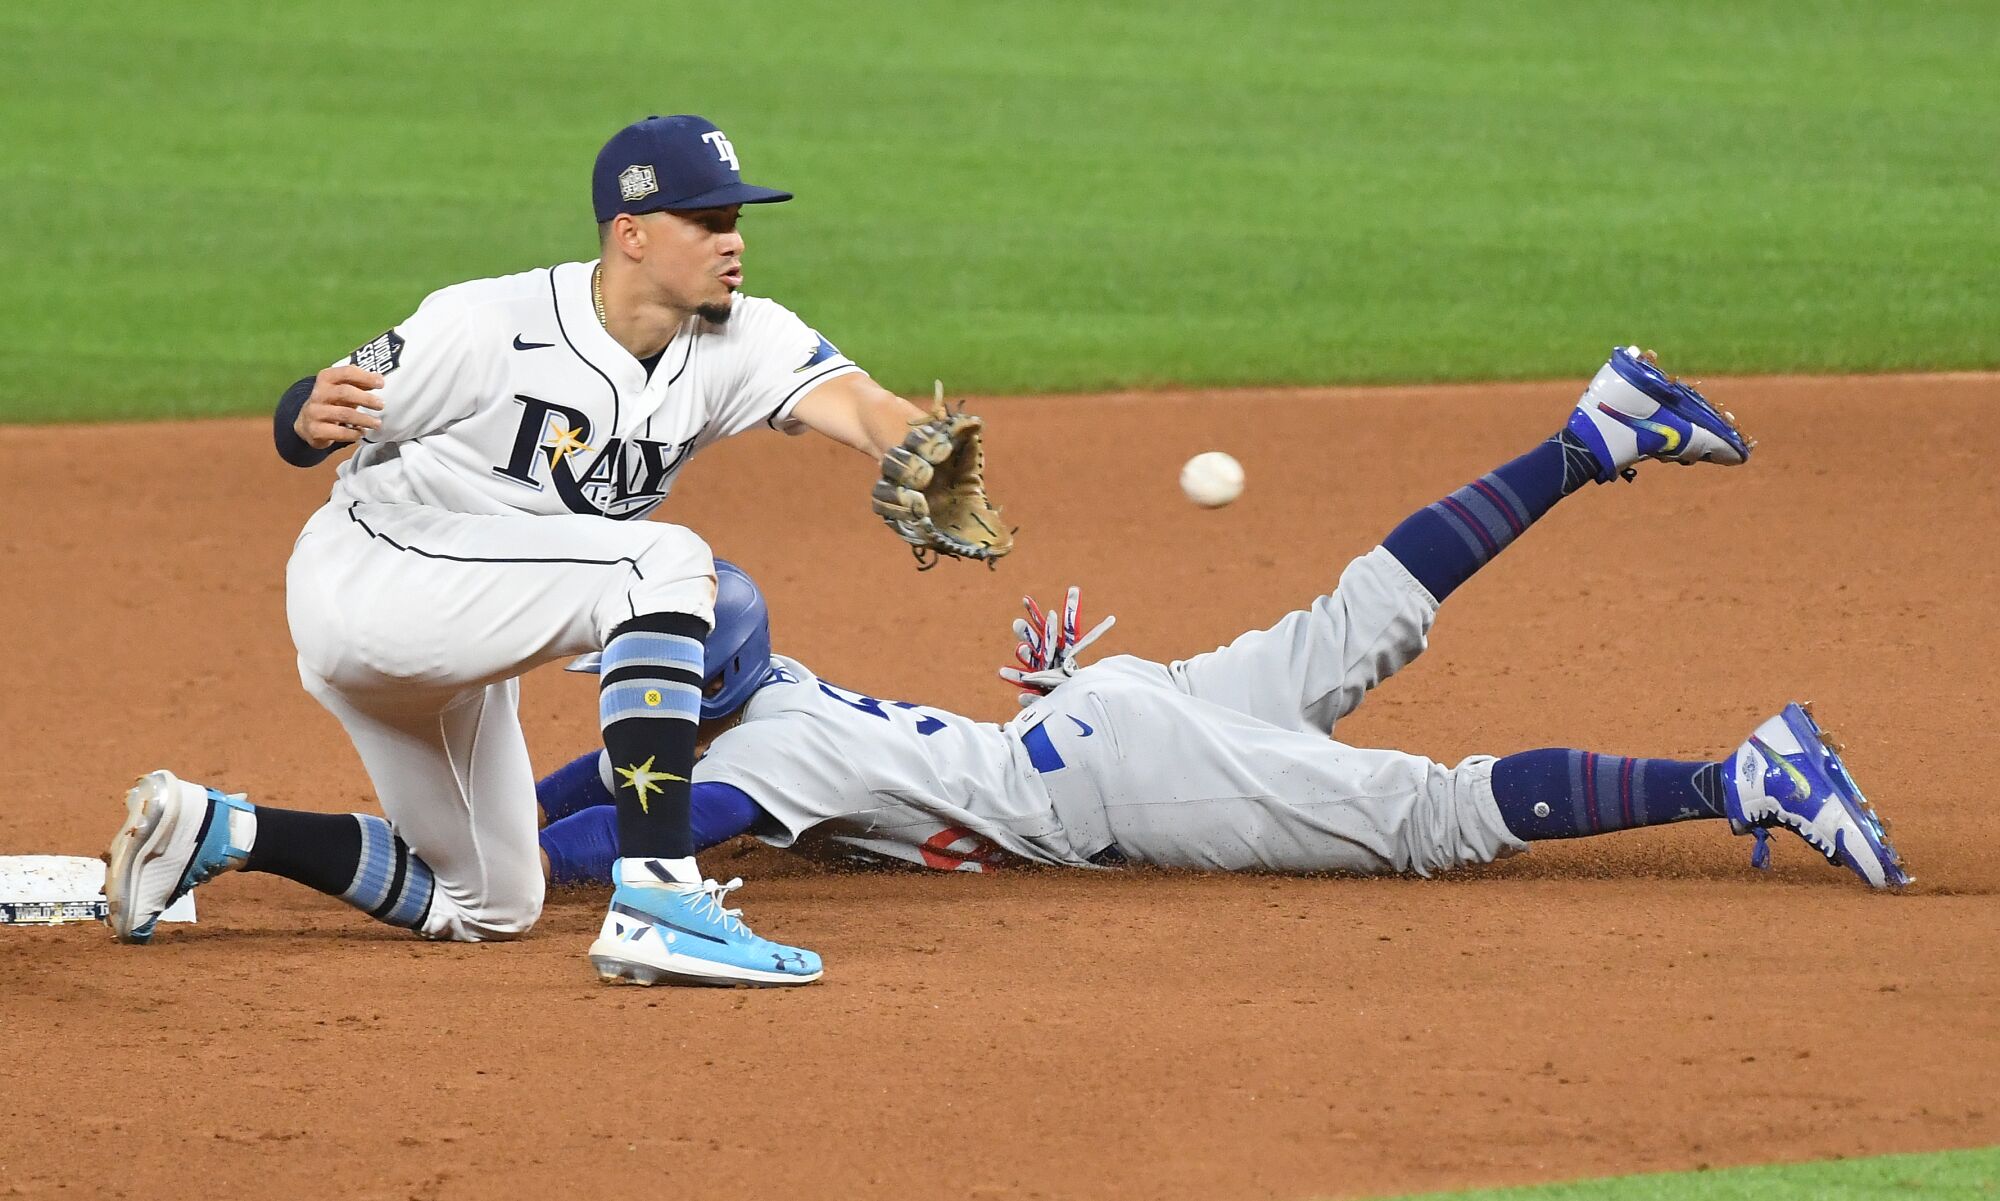 Dodgers baserunner Mookie Betts steals second base in front of Rays shortstop Willy Adames